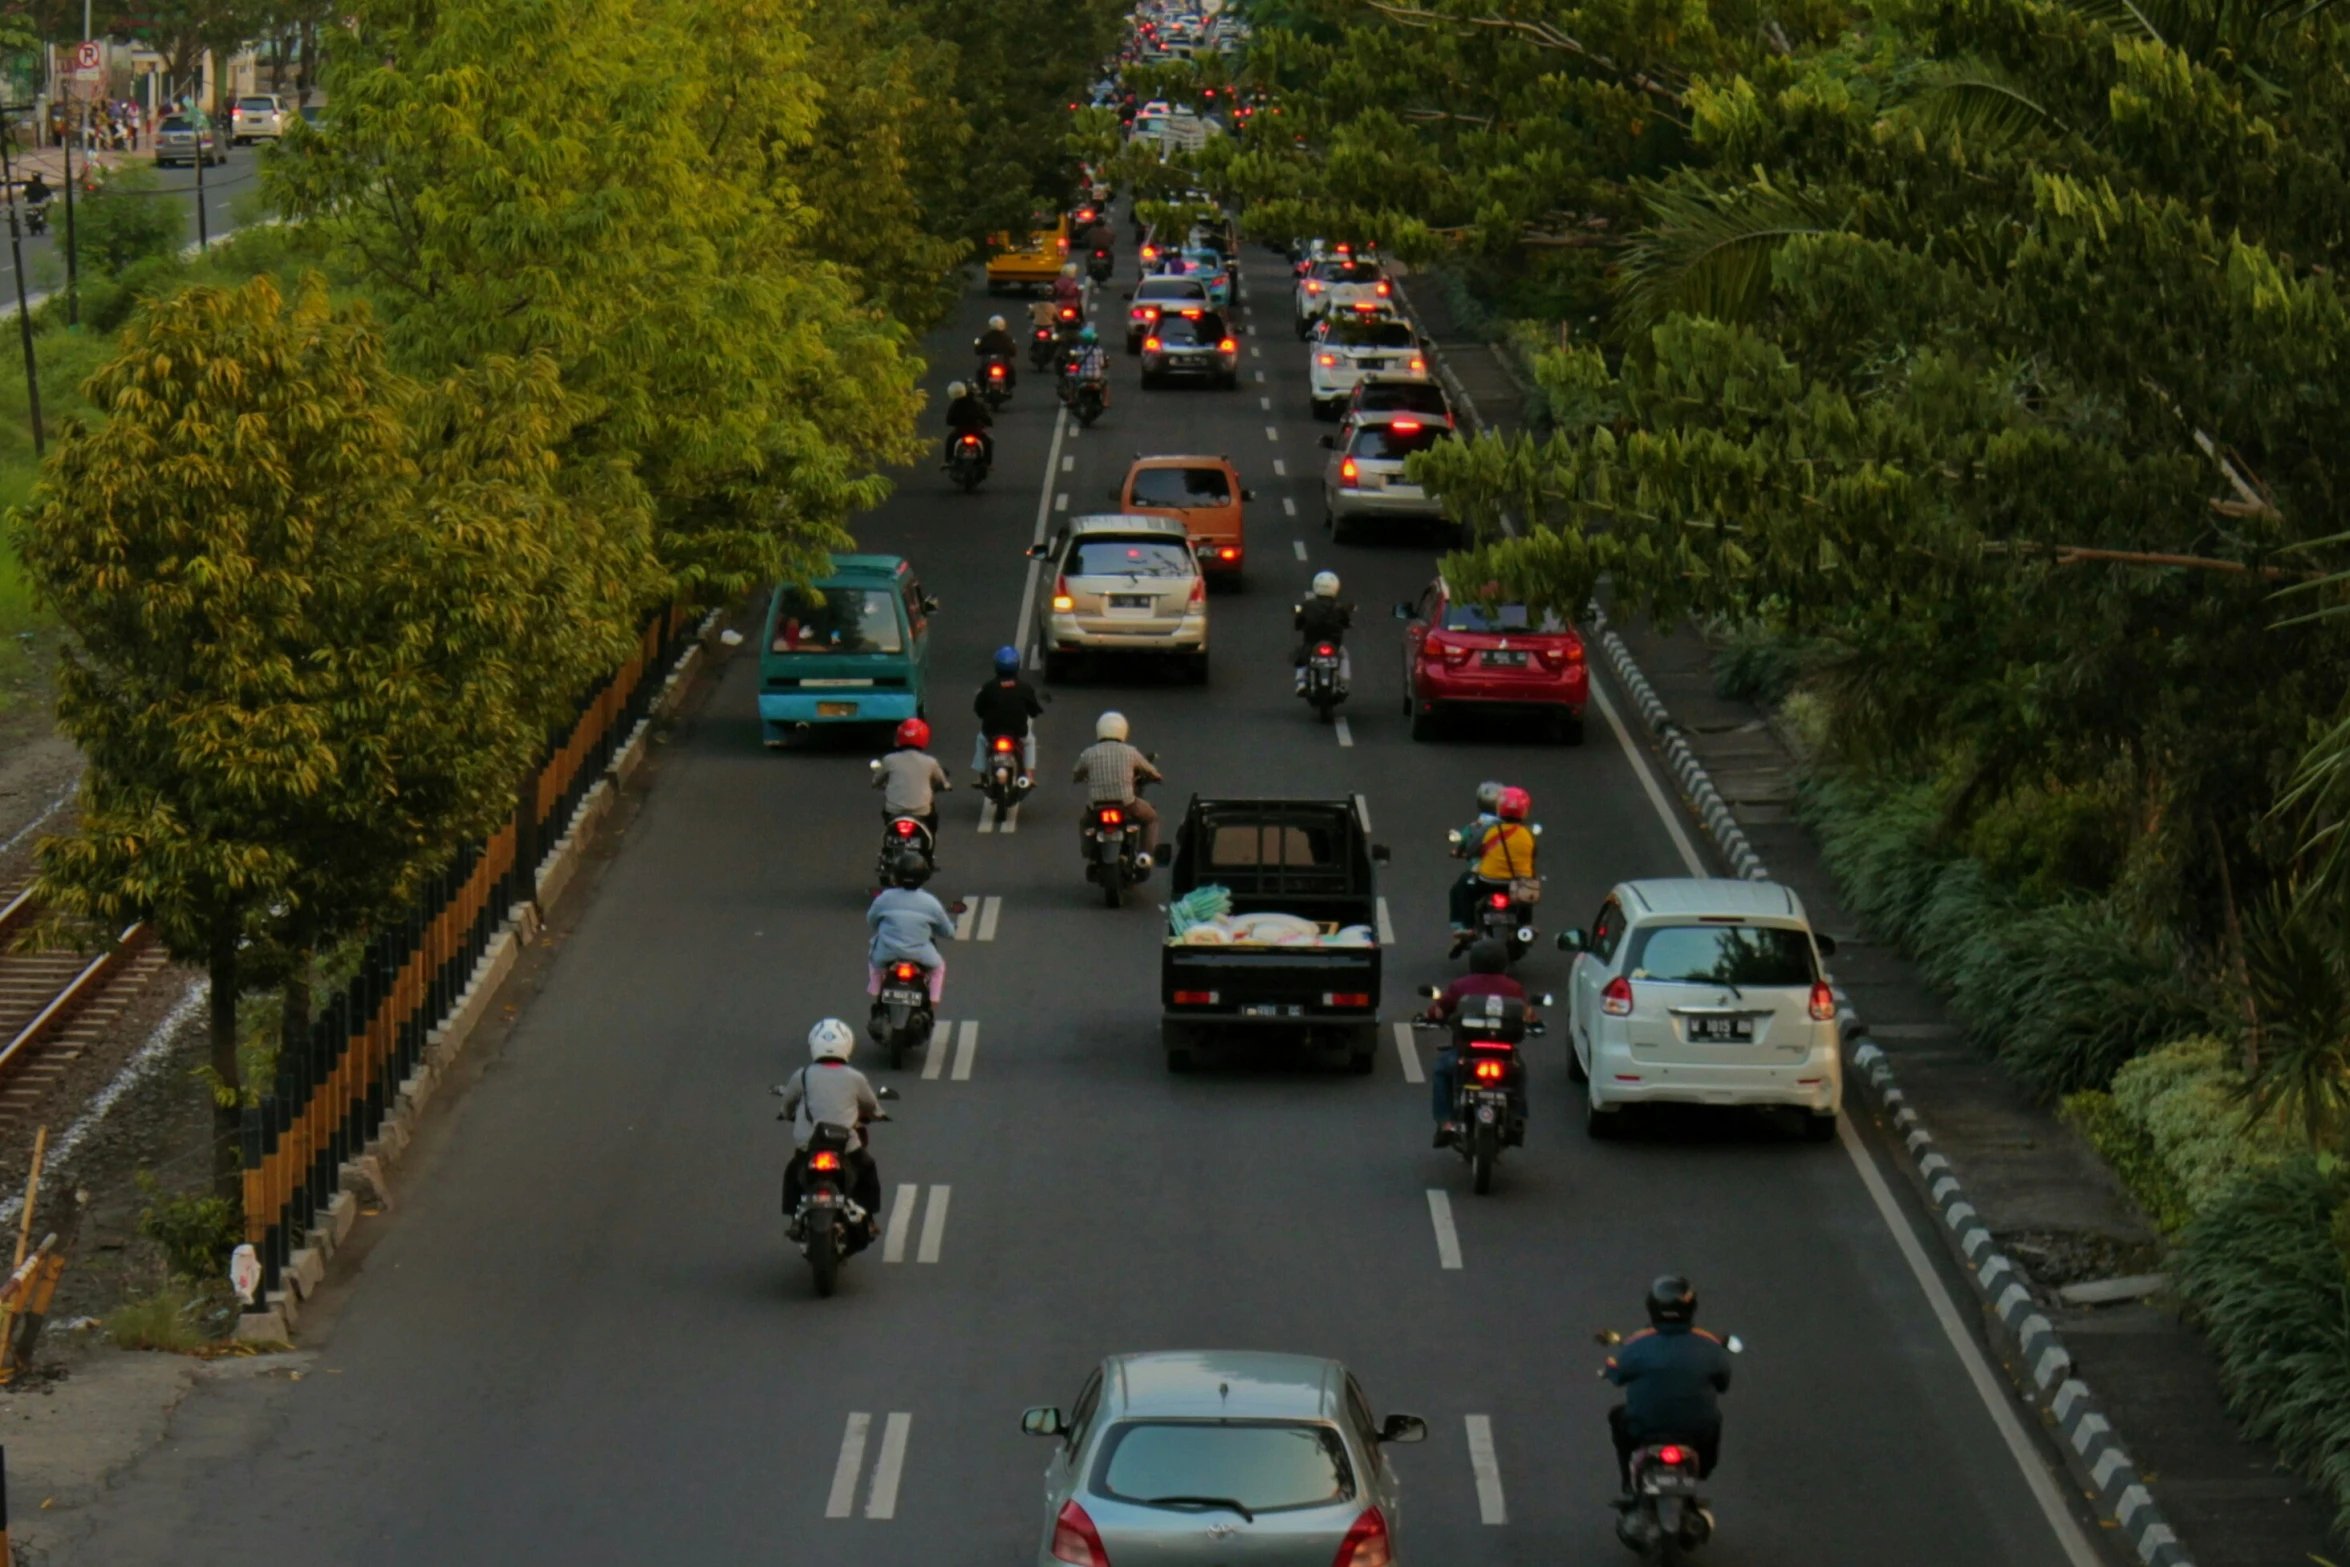 a street filled with traffic with cars and motorcycles